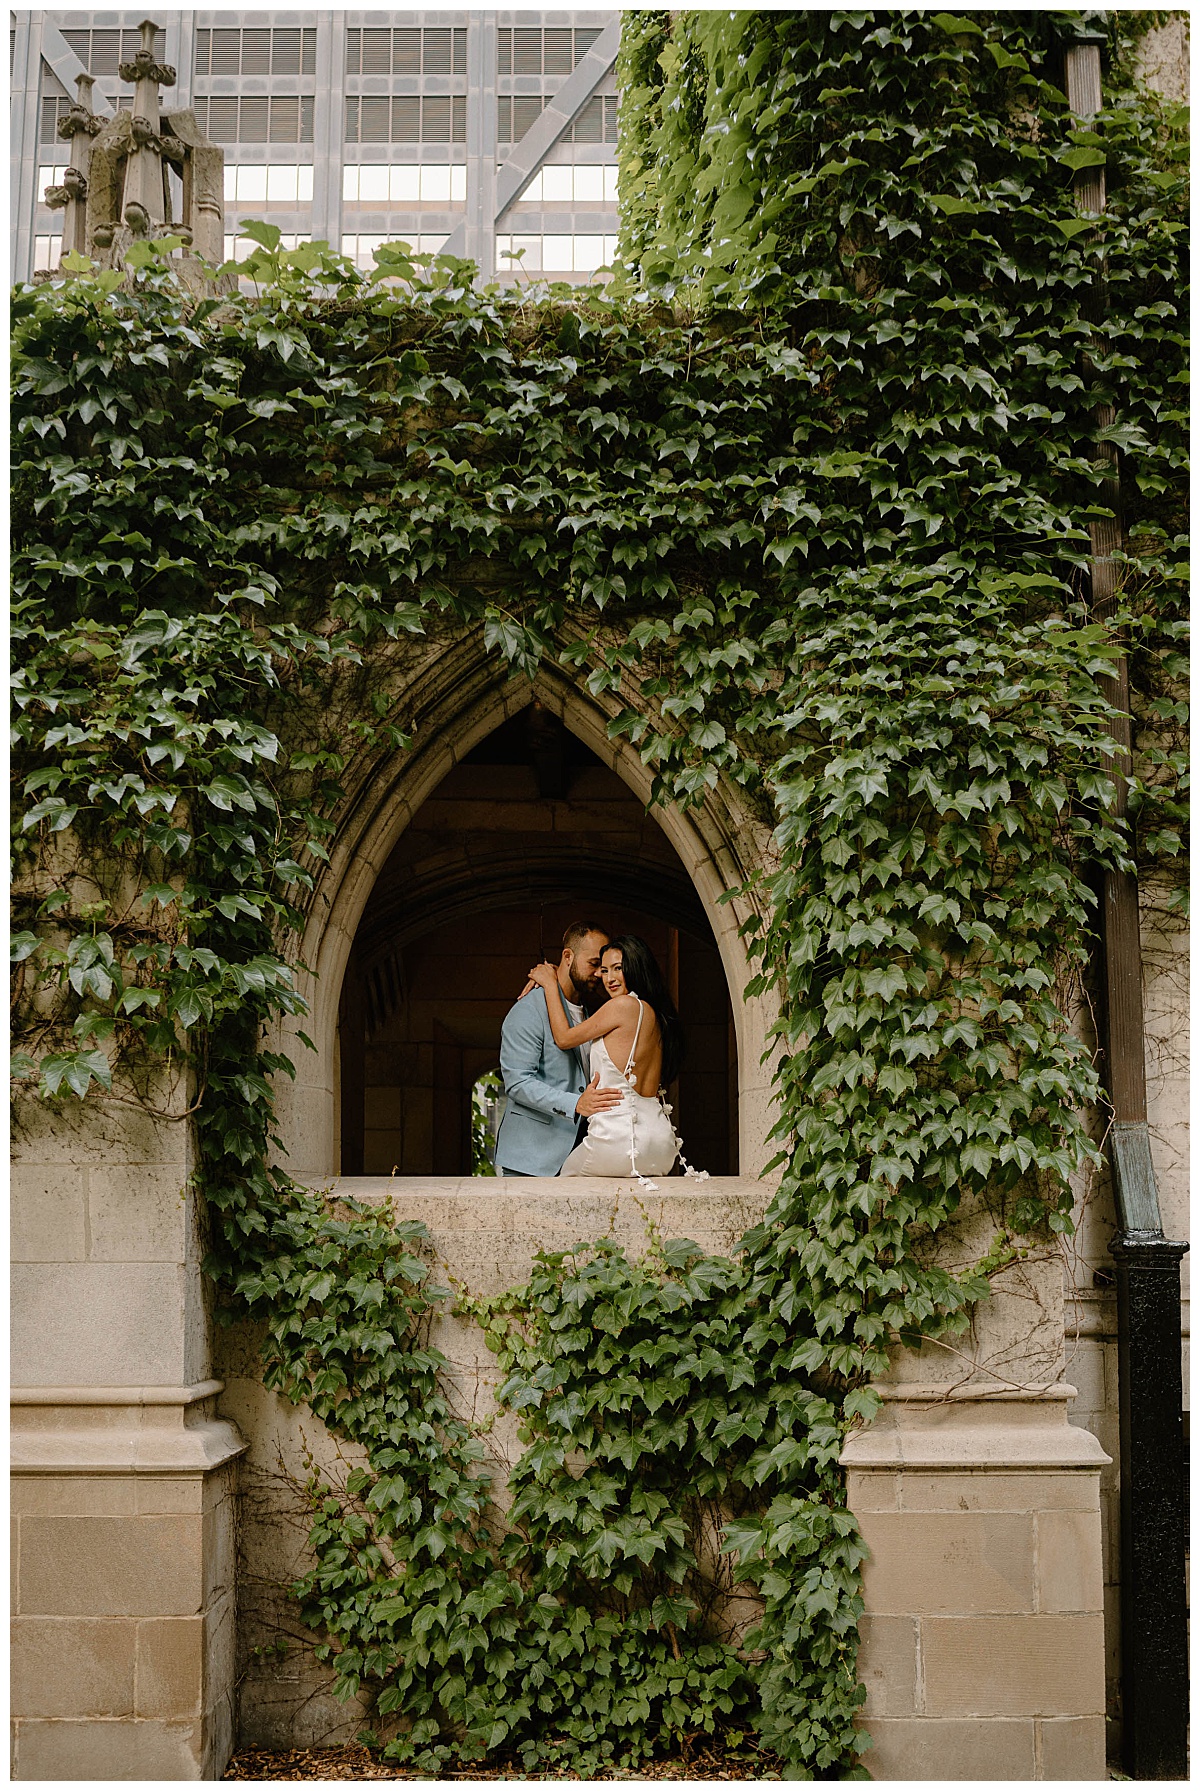 woman sits in archway while man hugs her waist by Chicago wedding photographer